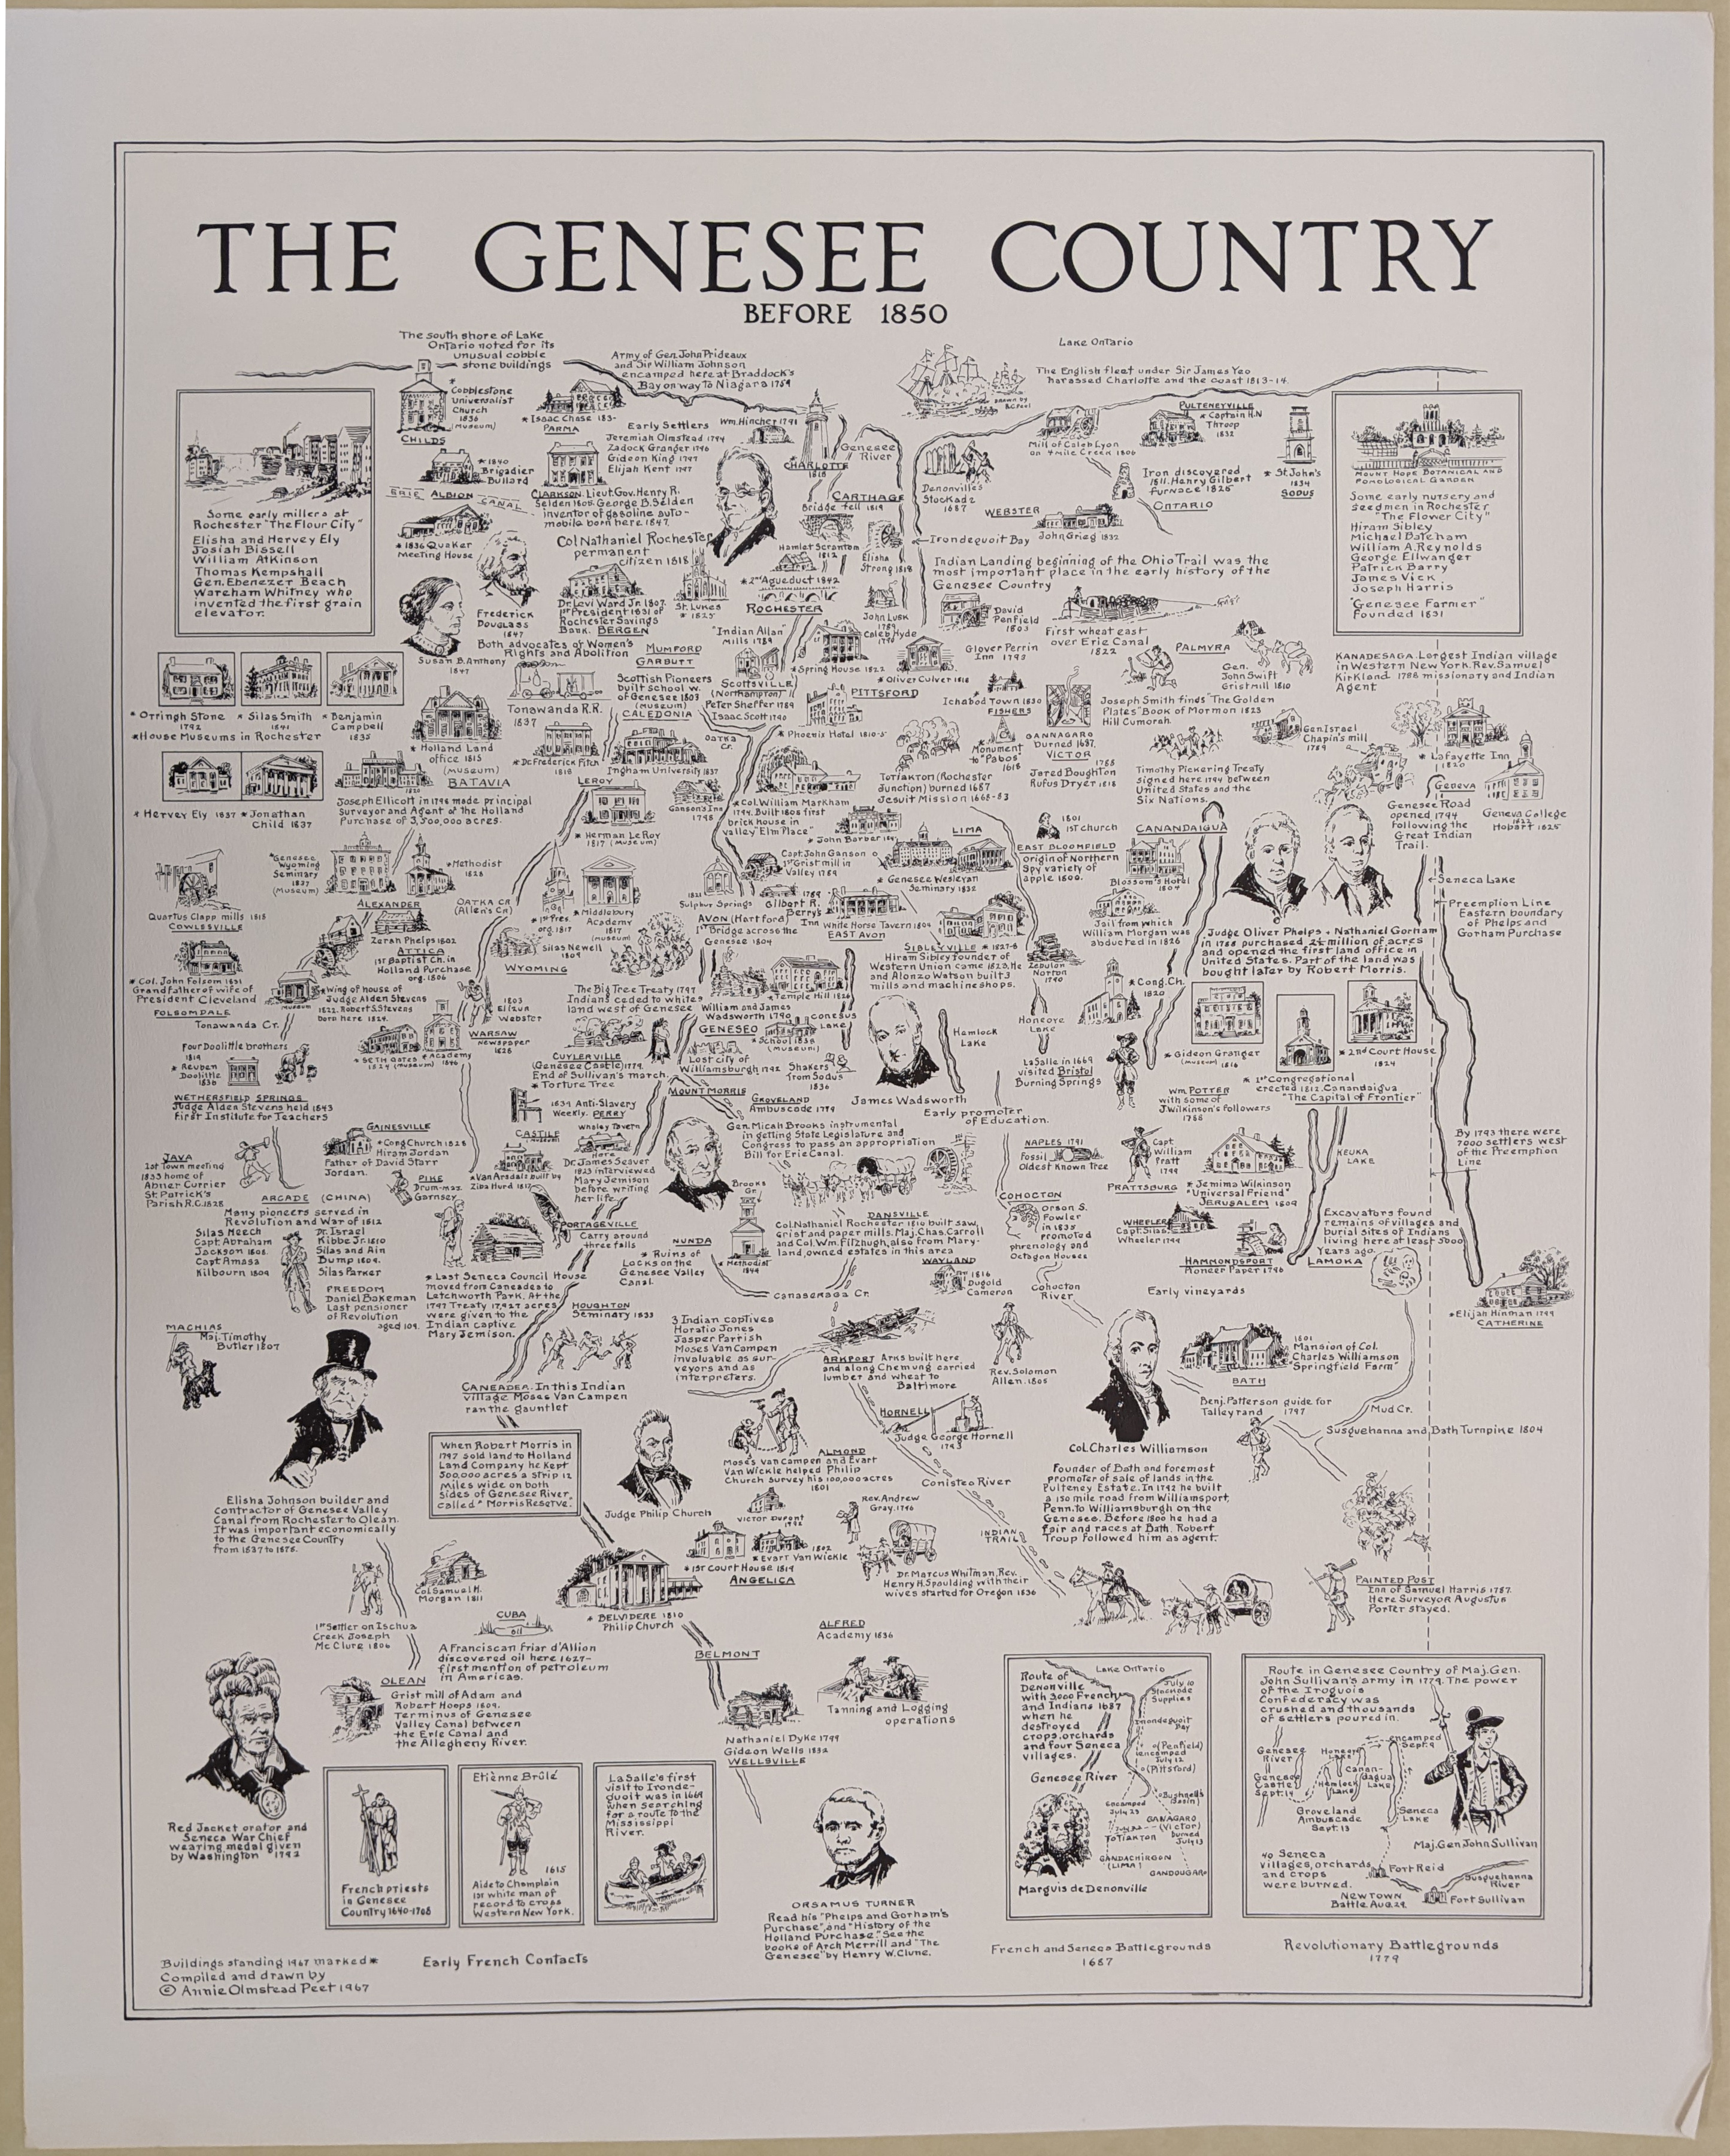 Pictorial map of the Genesee Country before 1850